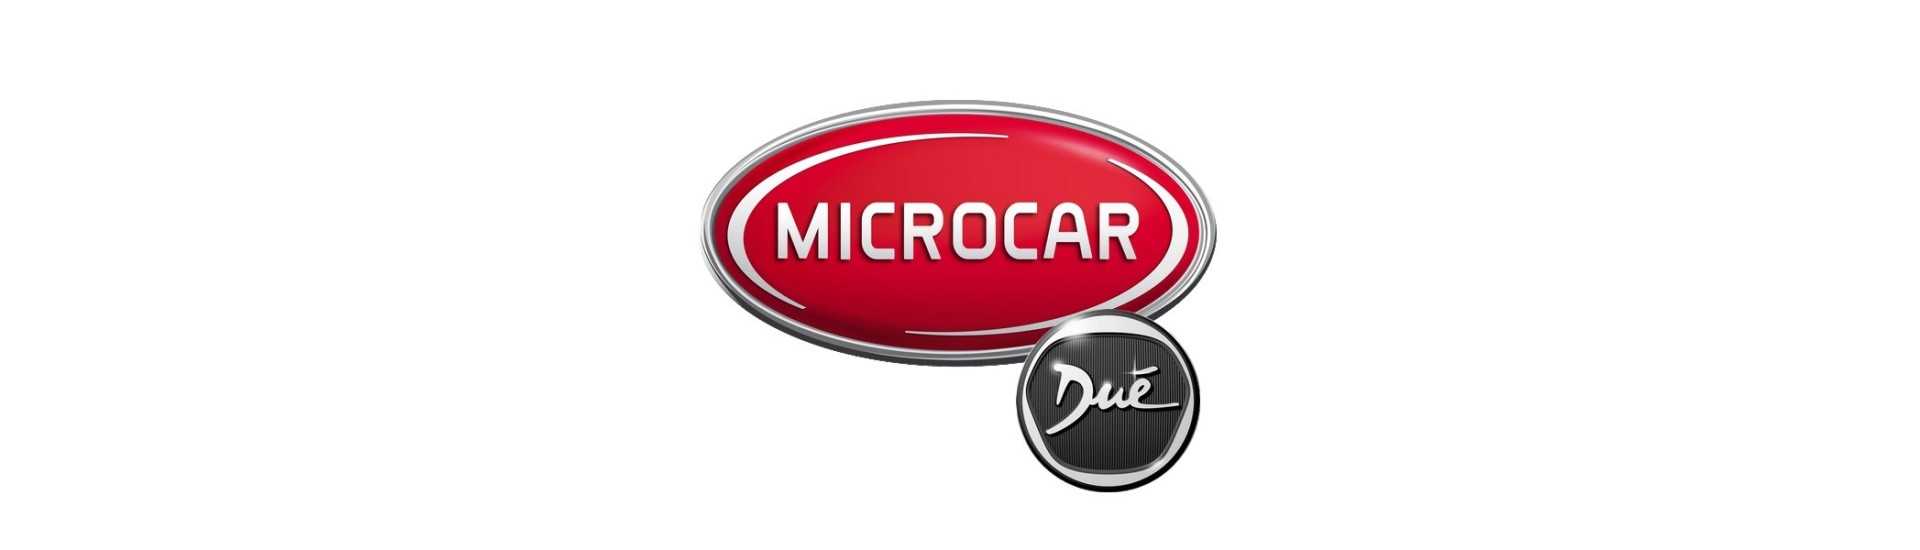 Best price safe without a permit Microcar Dué